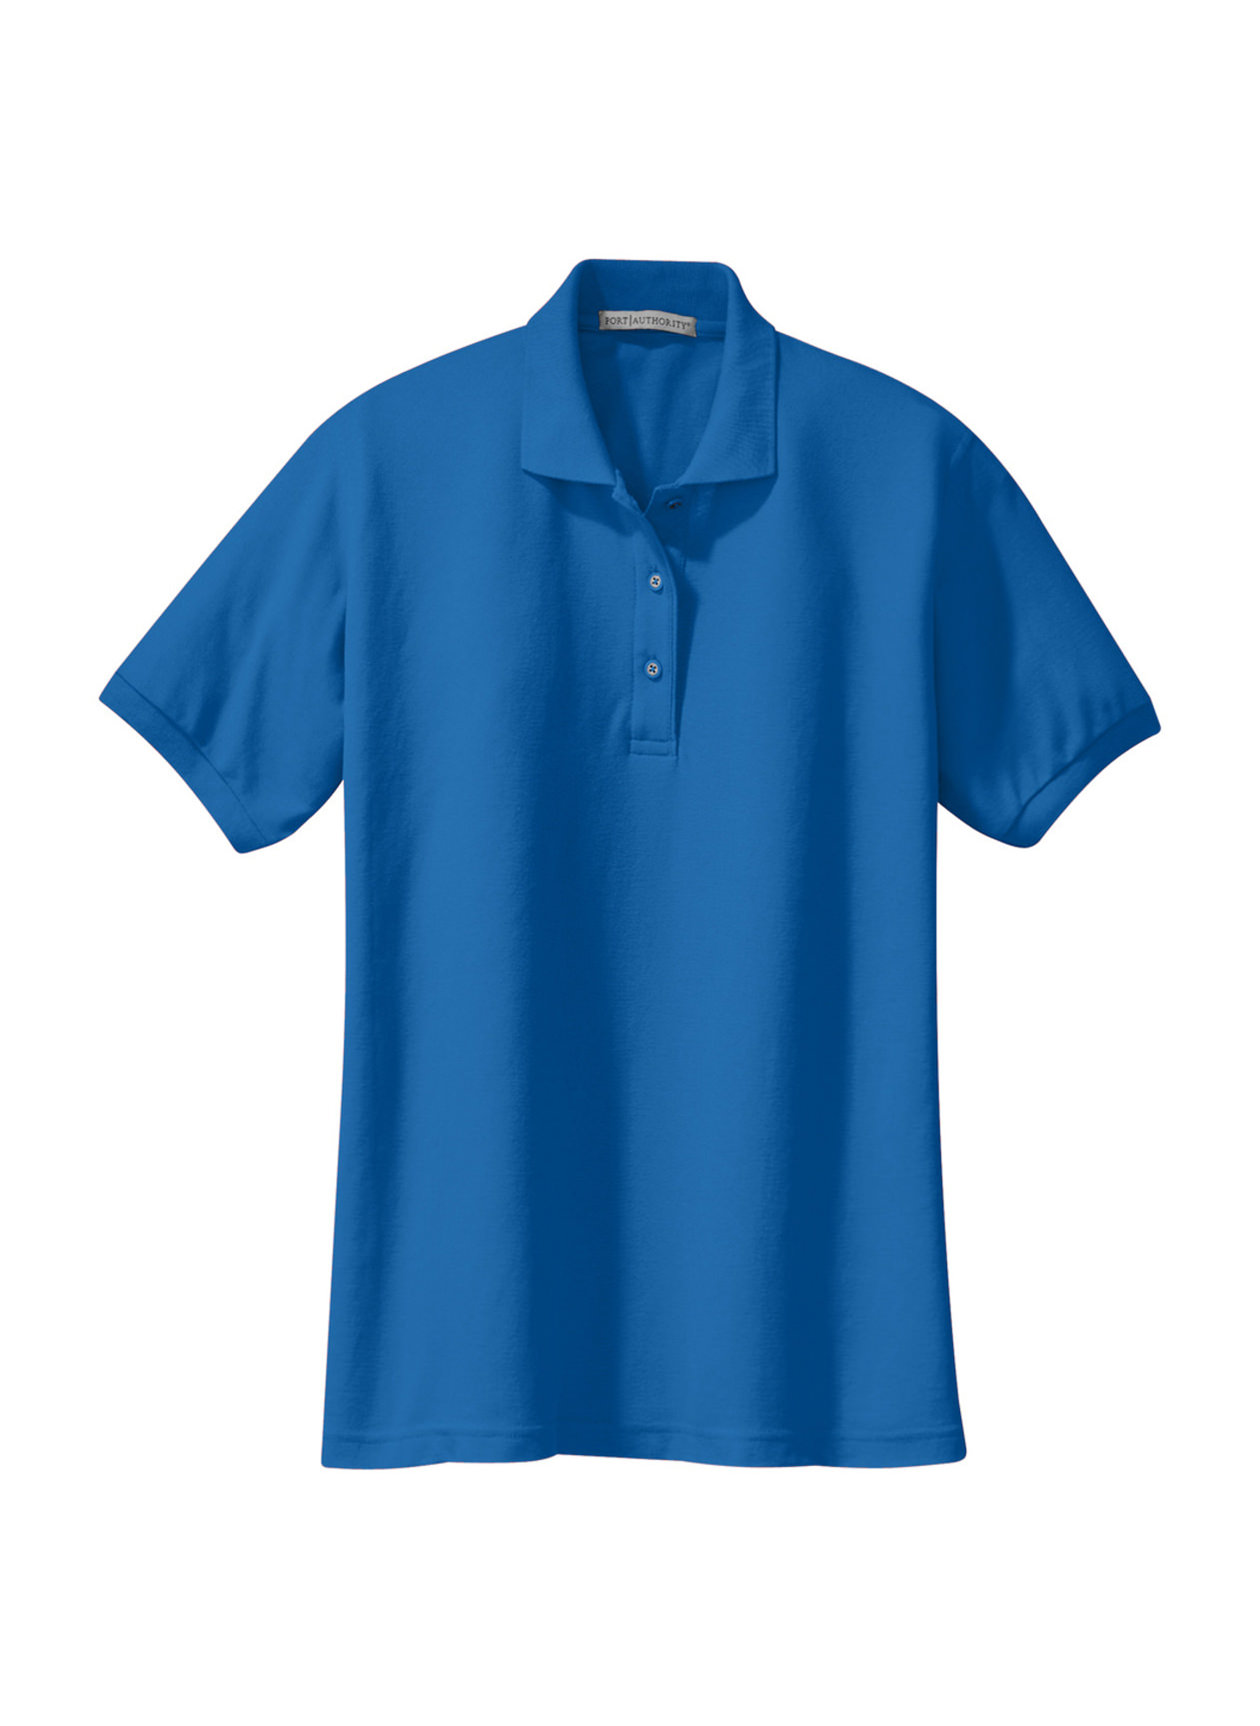 Port Authority Women's Strong Blue Silk Touch Polo